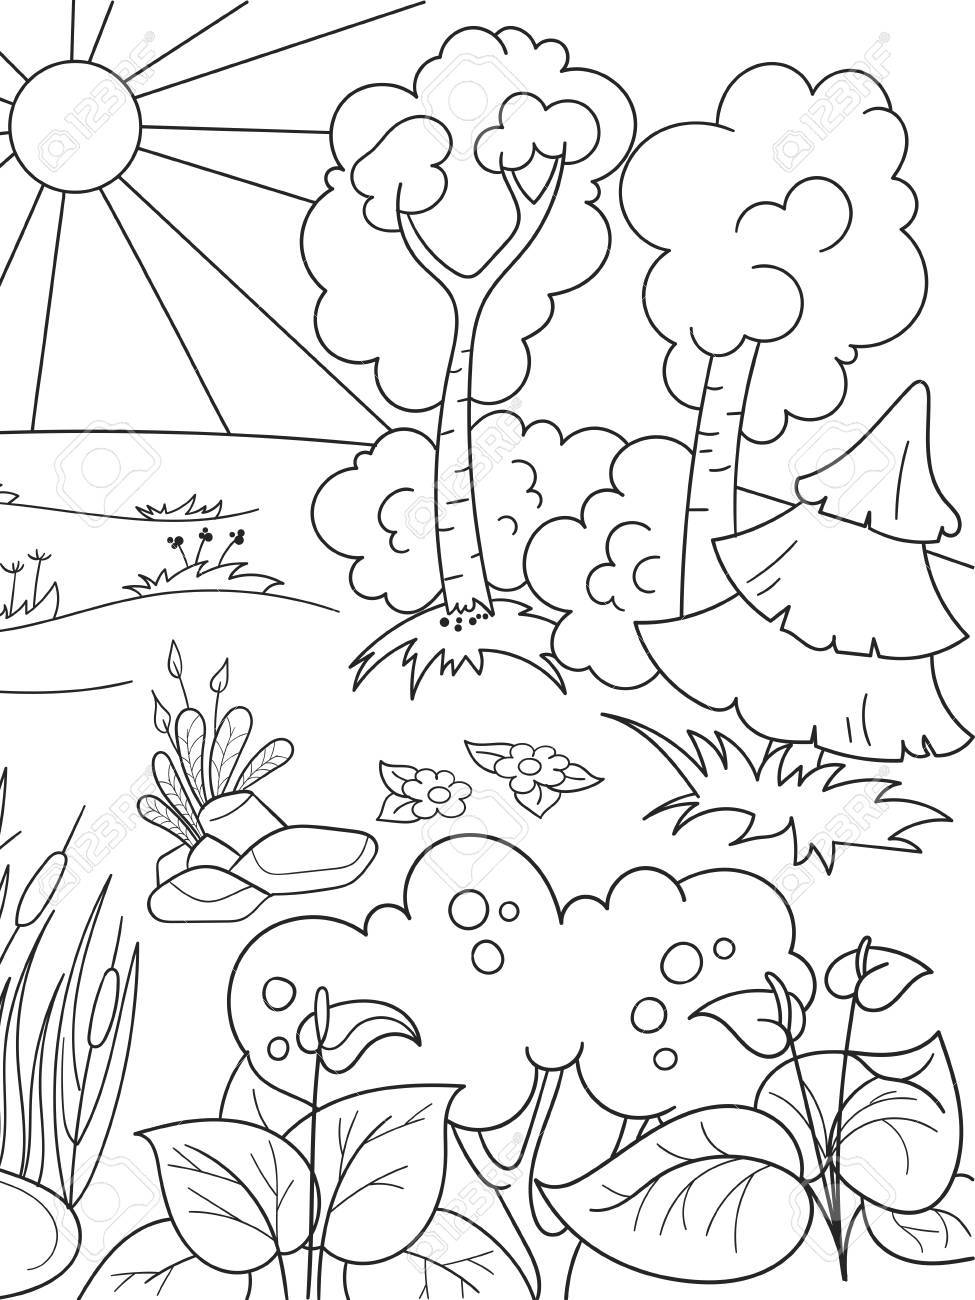 Forest Coloring Pages - Nature Coloring Pages